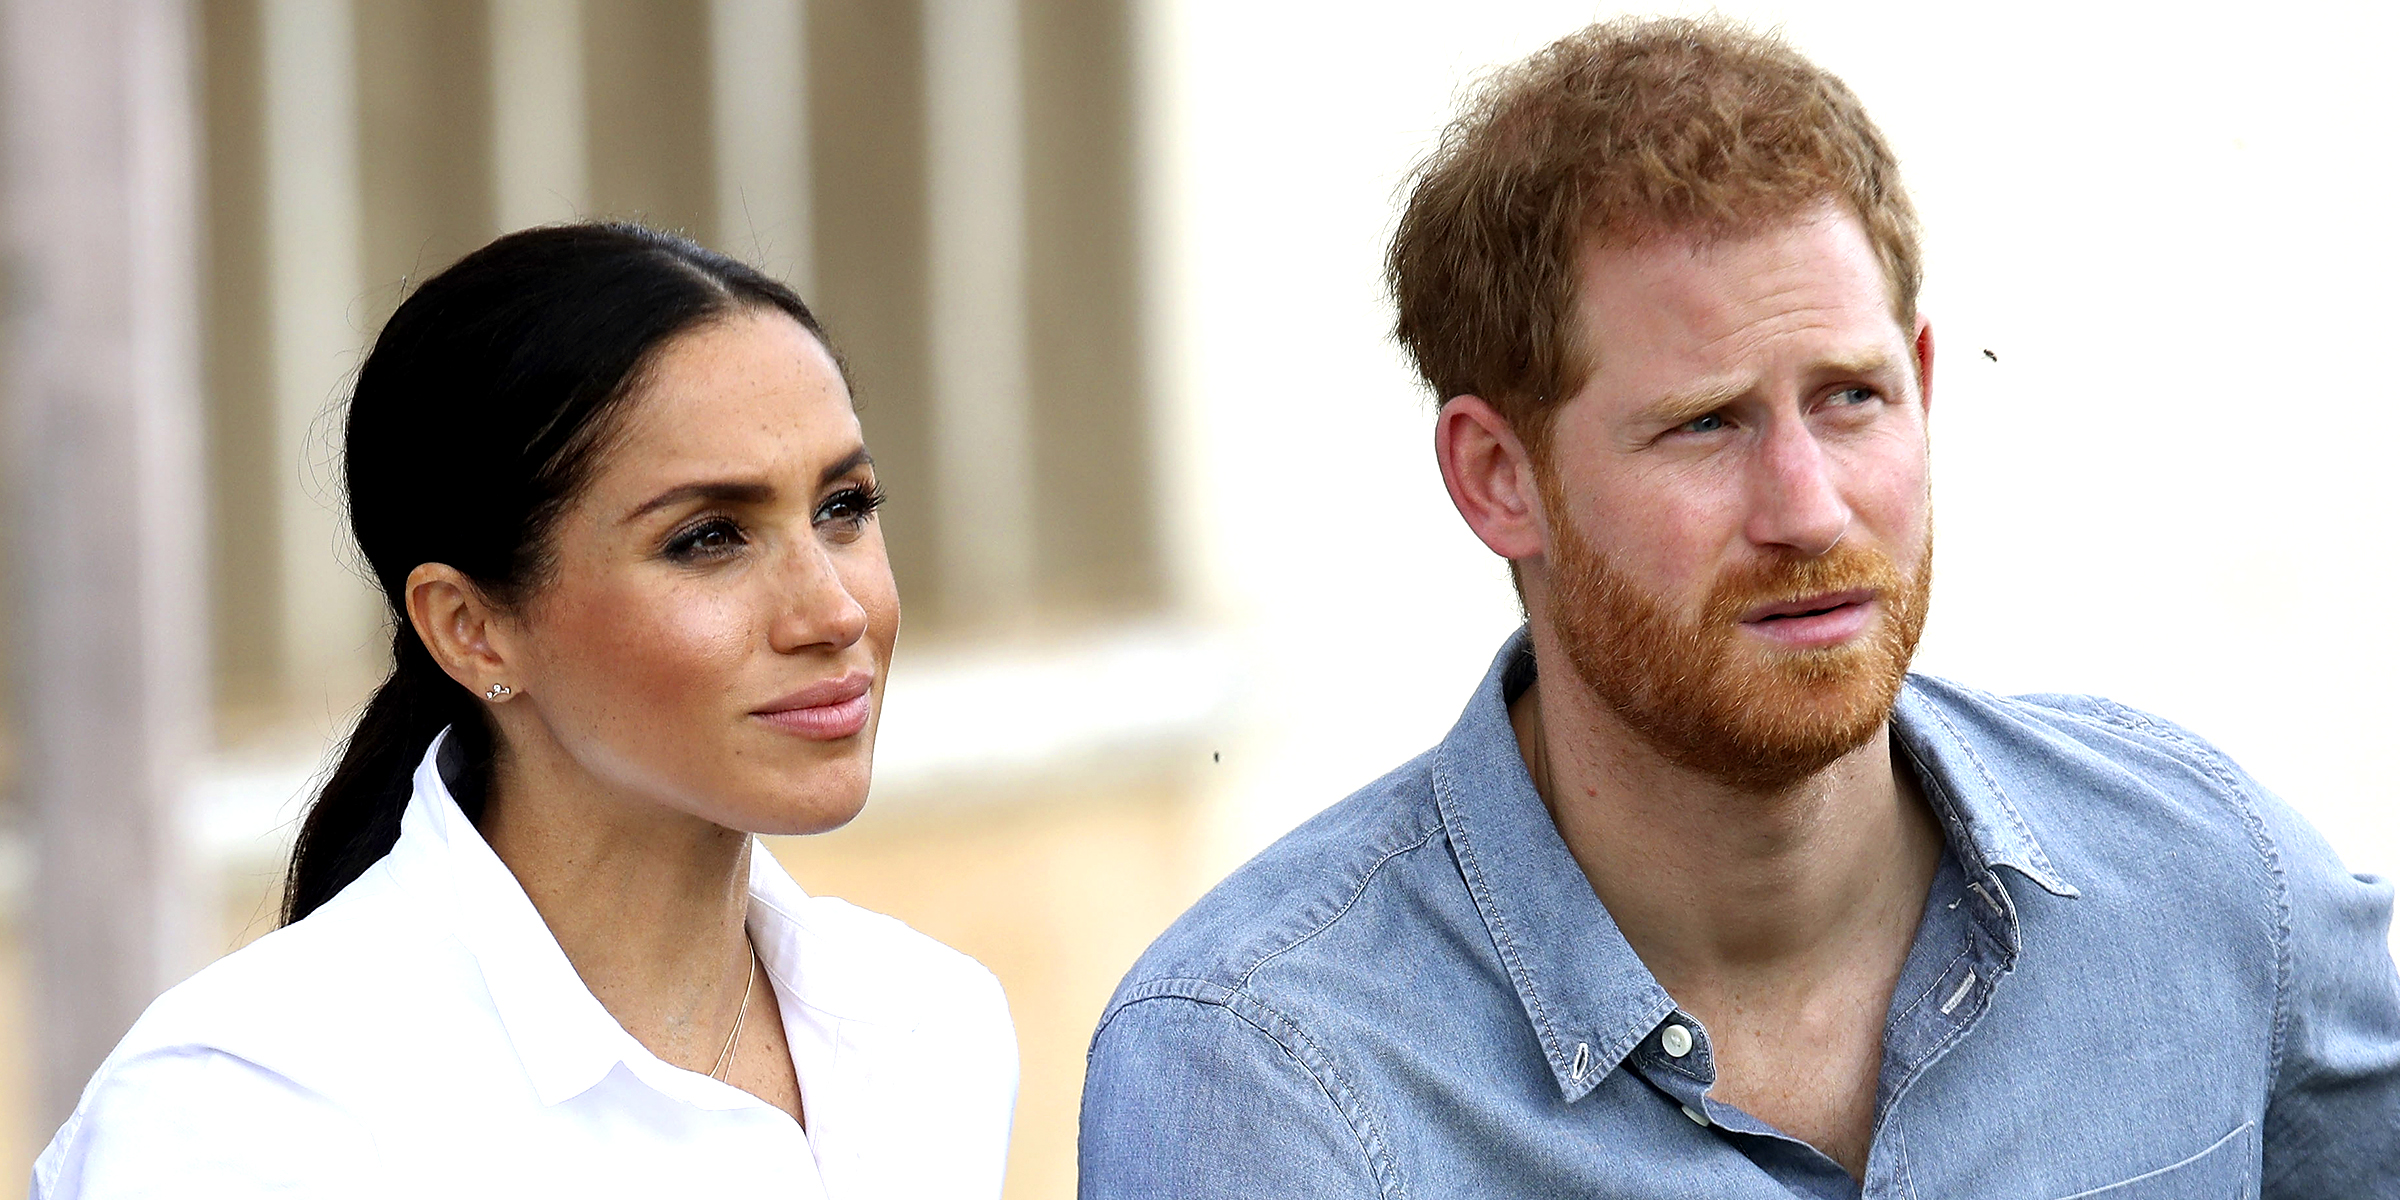 Prince Harry, Duke of Sussex and Meghan, Duchess of Sussex. | Source: Getty Images